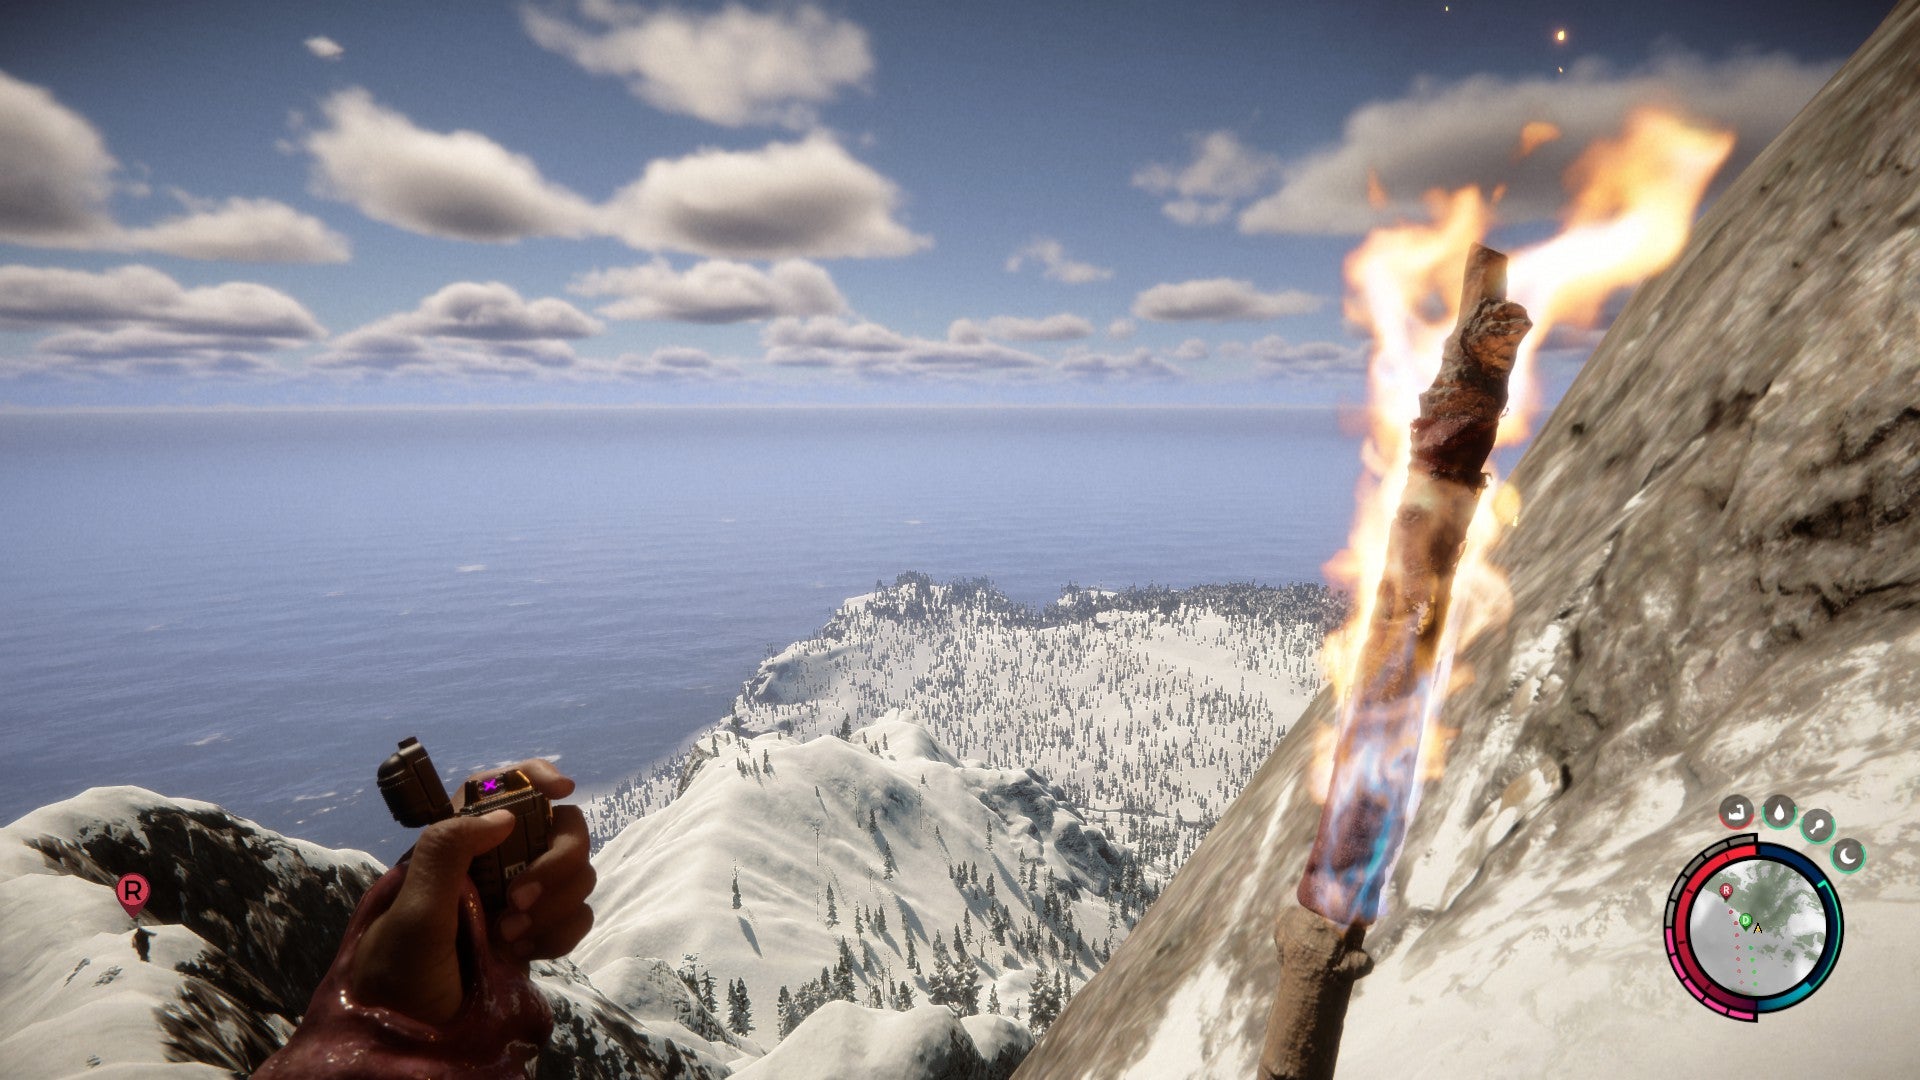 Sons of the forest - holding a flaming torch, looking at the landscape and the sea from the top of the mountain